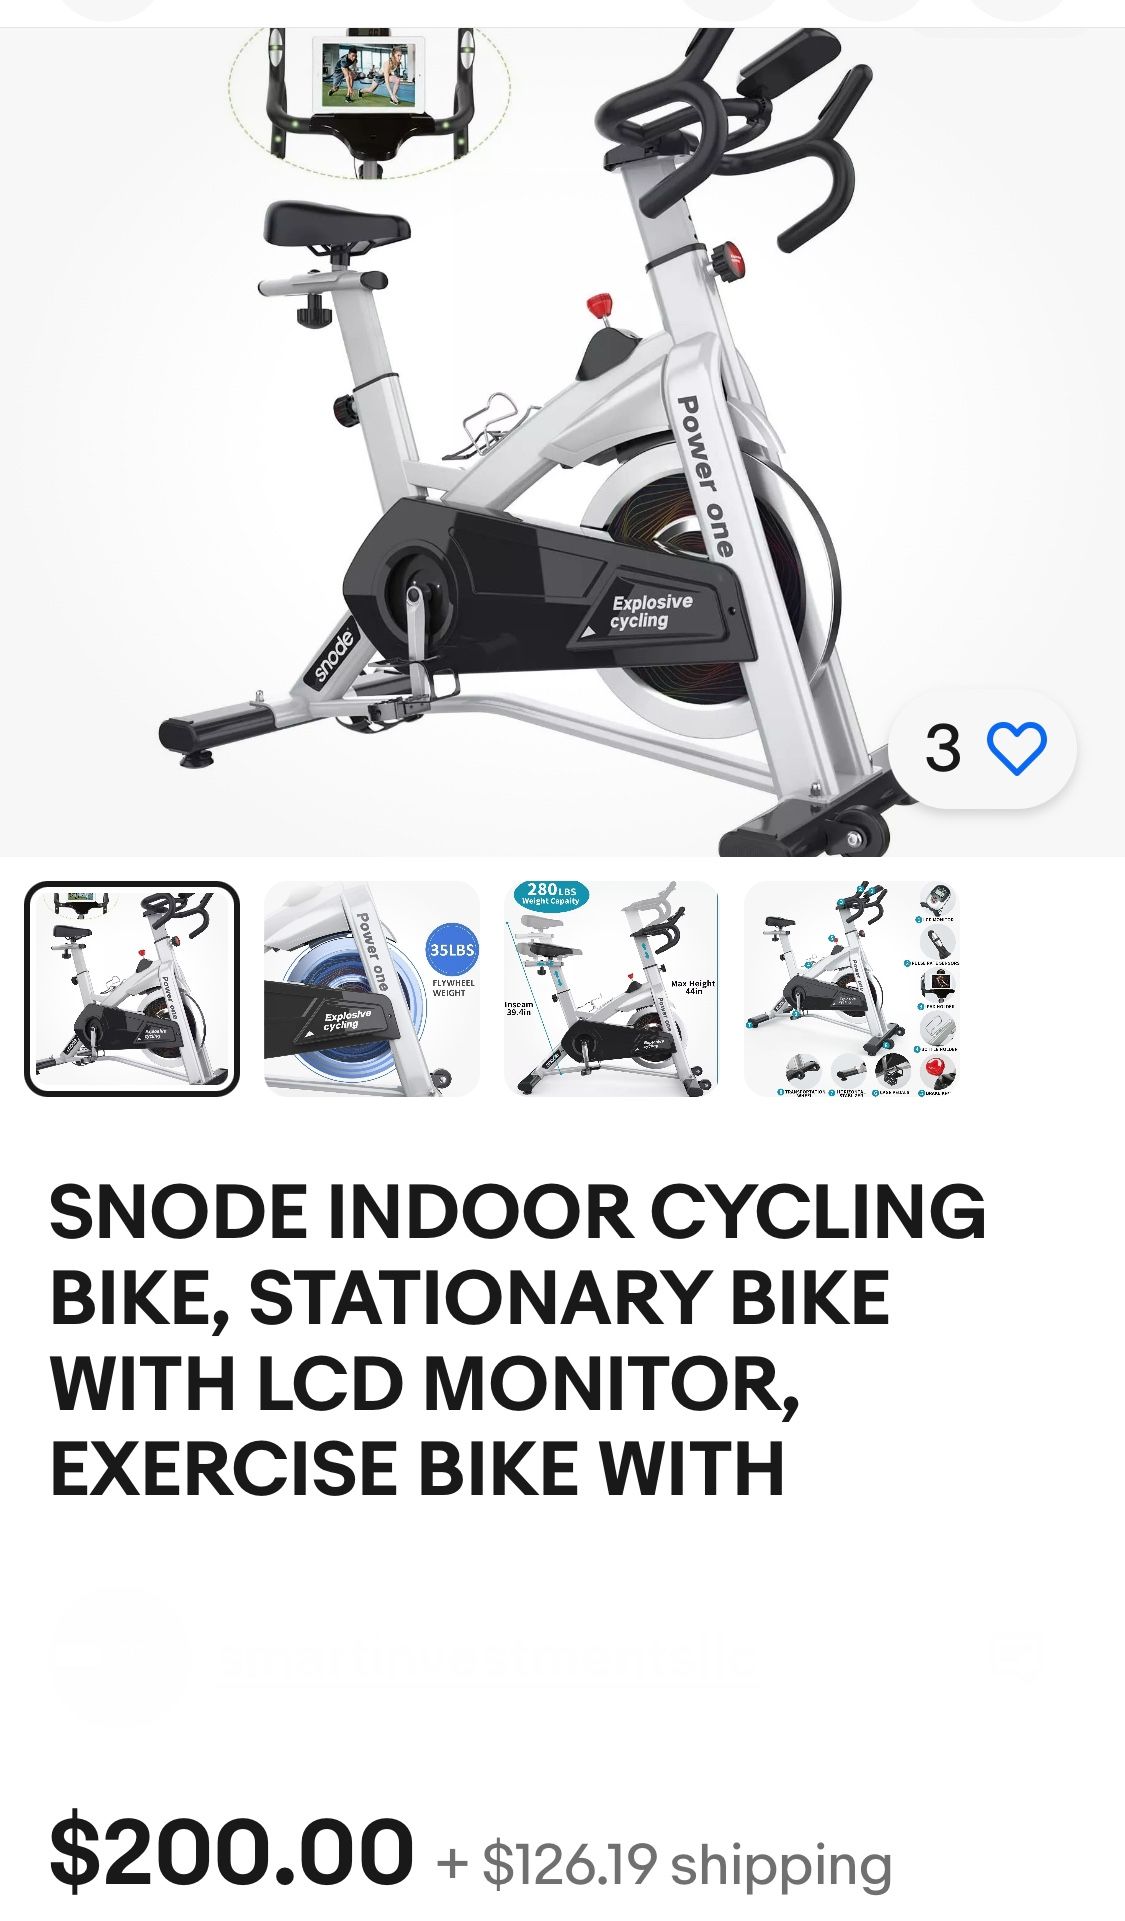 SNODE INDOOR CYCLING BIKE, STATIONARY BIKE WITH LCD MONITOR, EXERCISE BIKE 